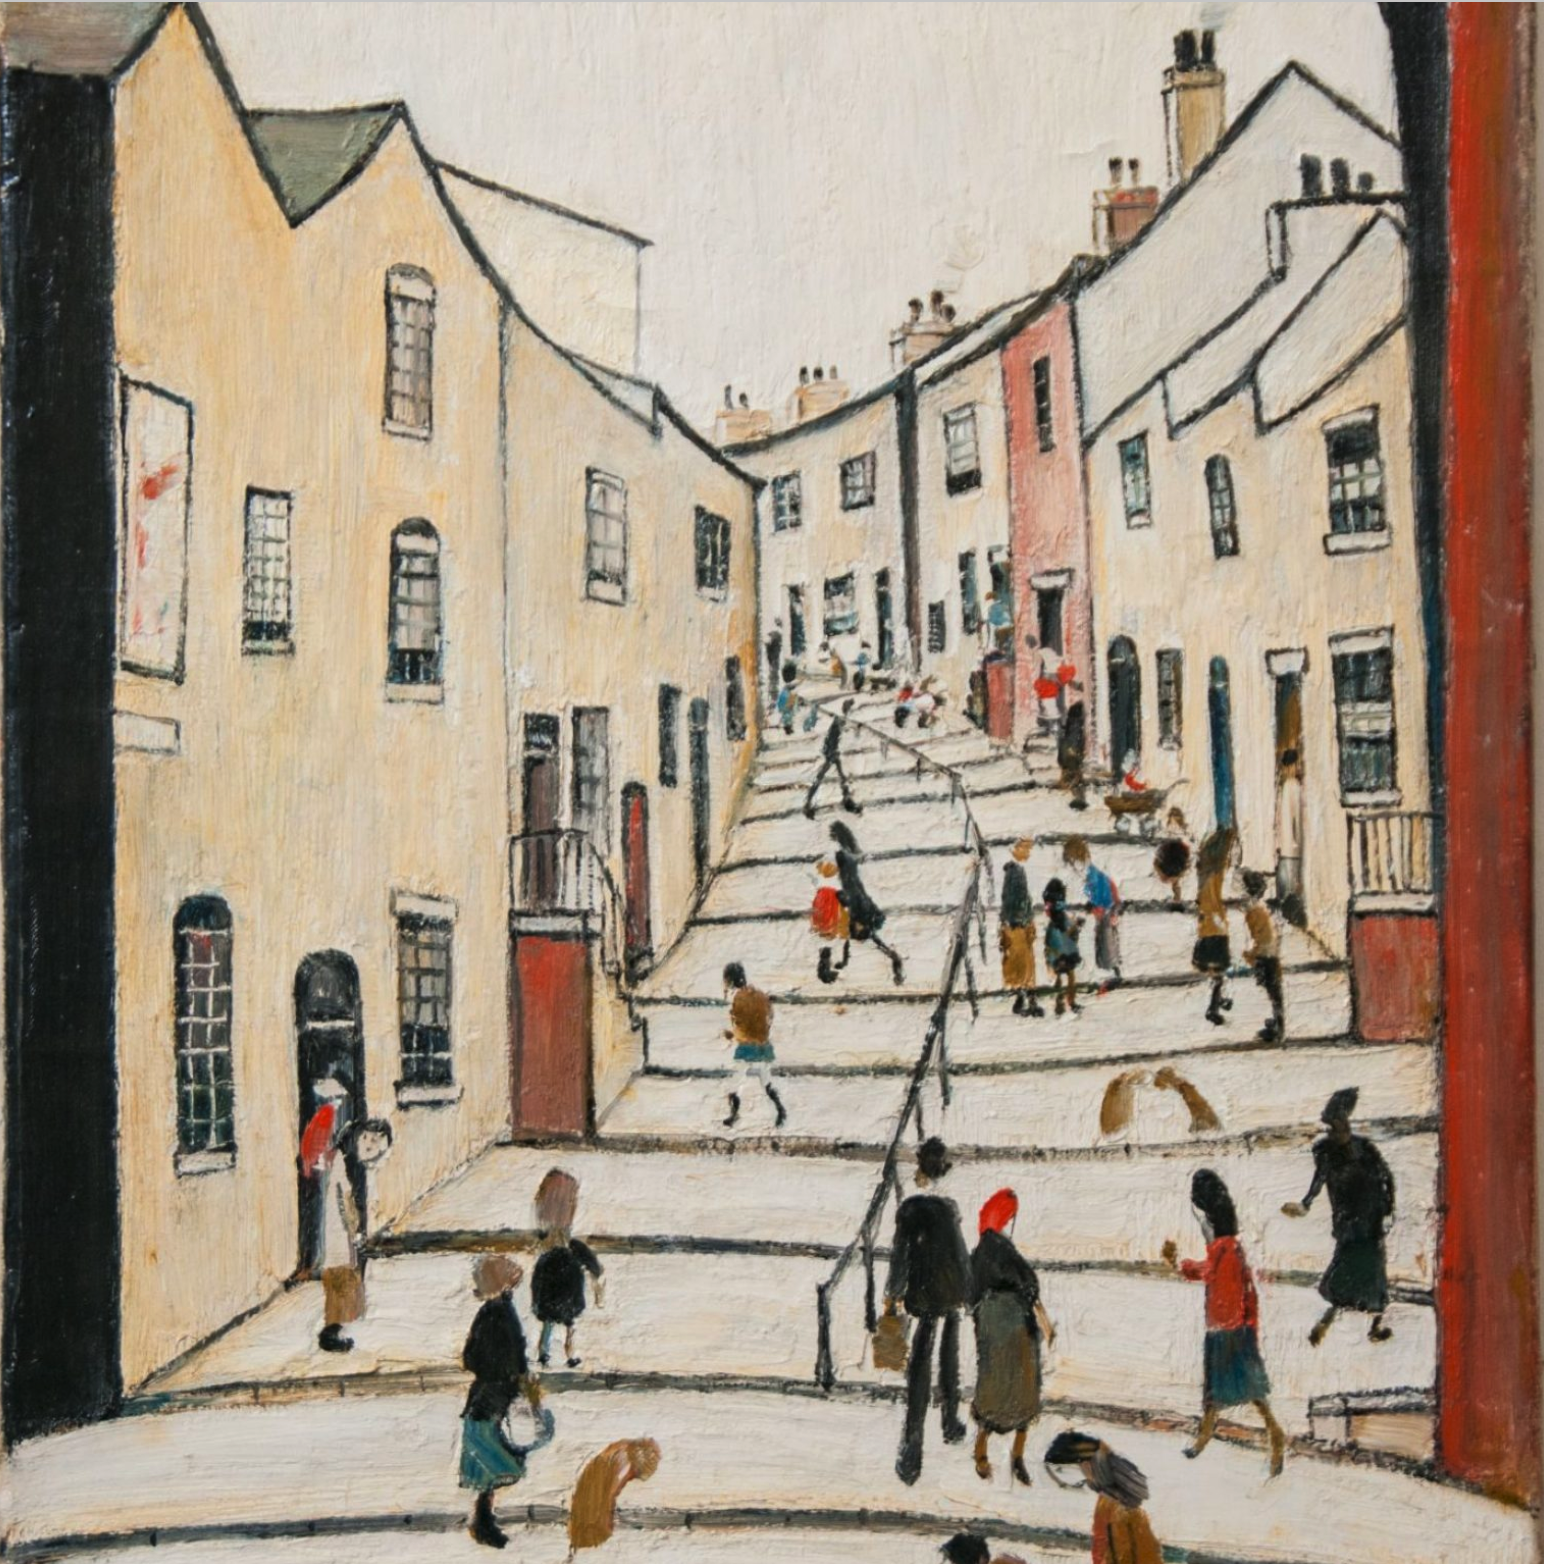 The Street with Many Steps (1961) by Laurence Stephen Lowry (1887 - 1976), English artist.